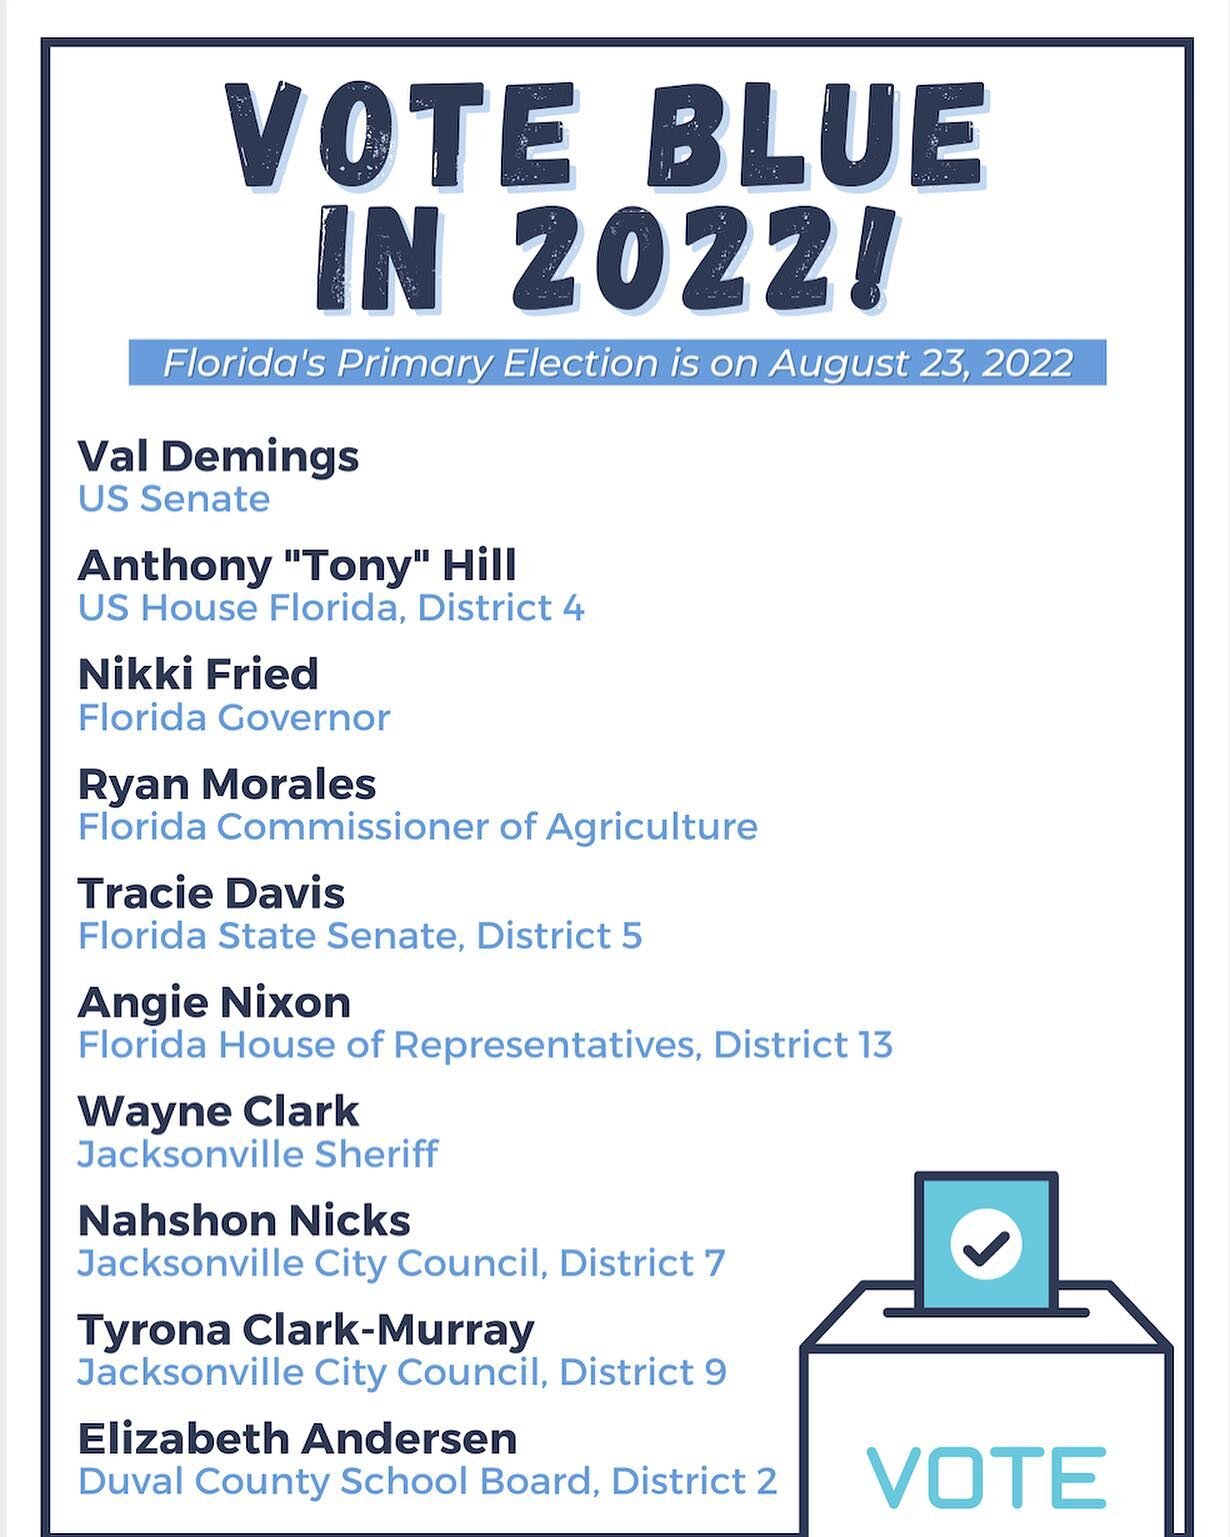 Duval county early voting has begun!!! View the complete list of early voting locations at the link in our bio! 🗳 *Please note the candidates shown are recommended and do not show the full list of offices up for election. We recommend people check t